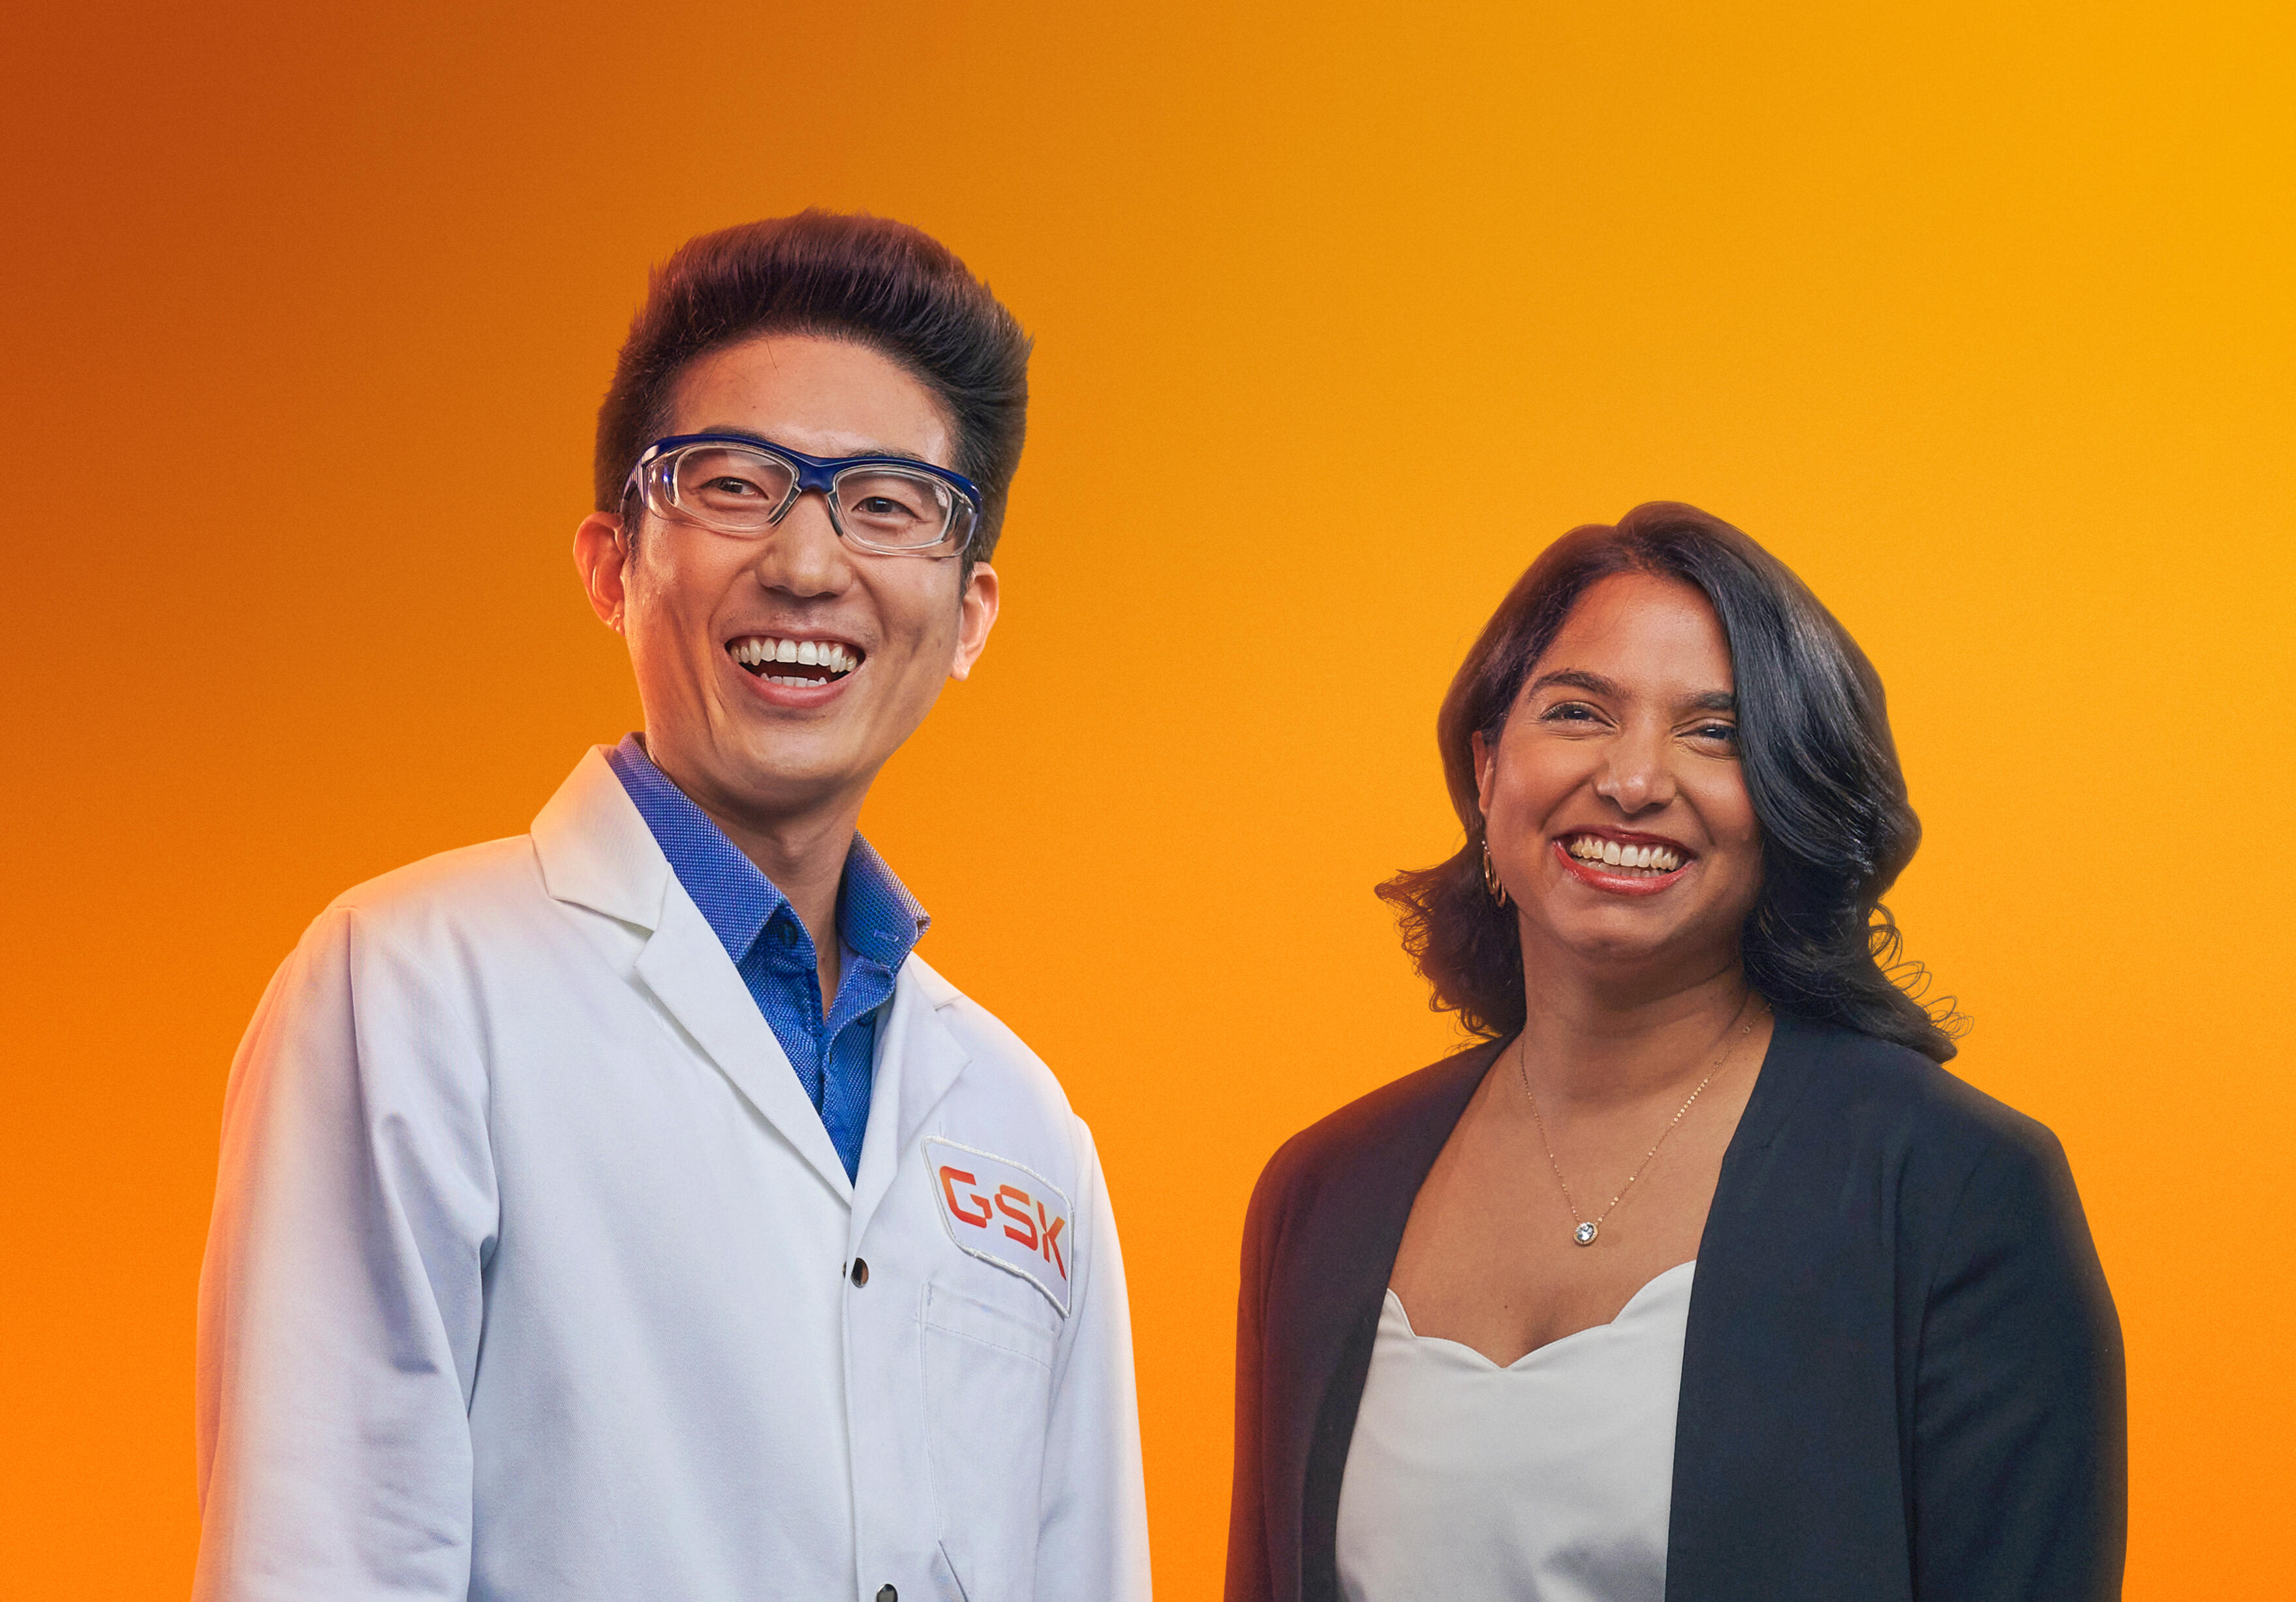 Male scientist and female dressed smartly smiling in a studio